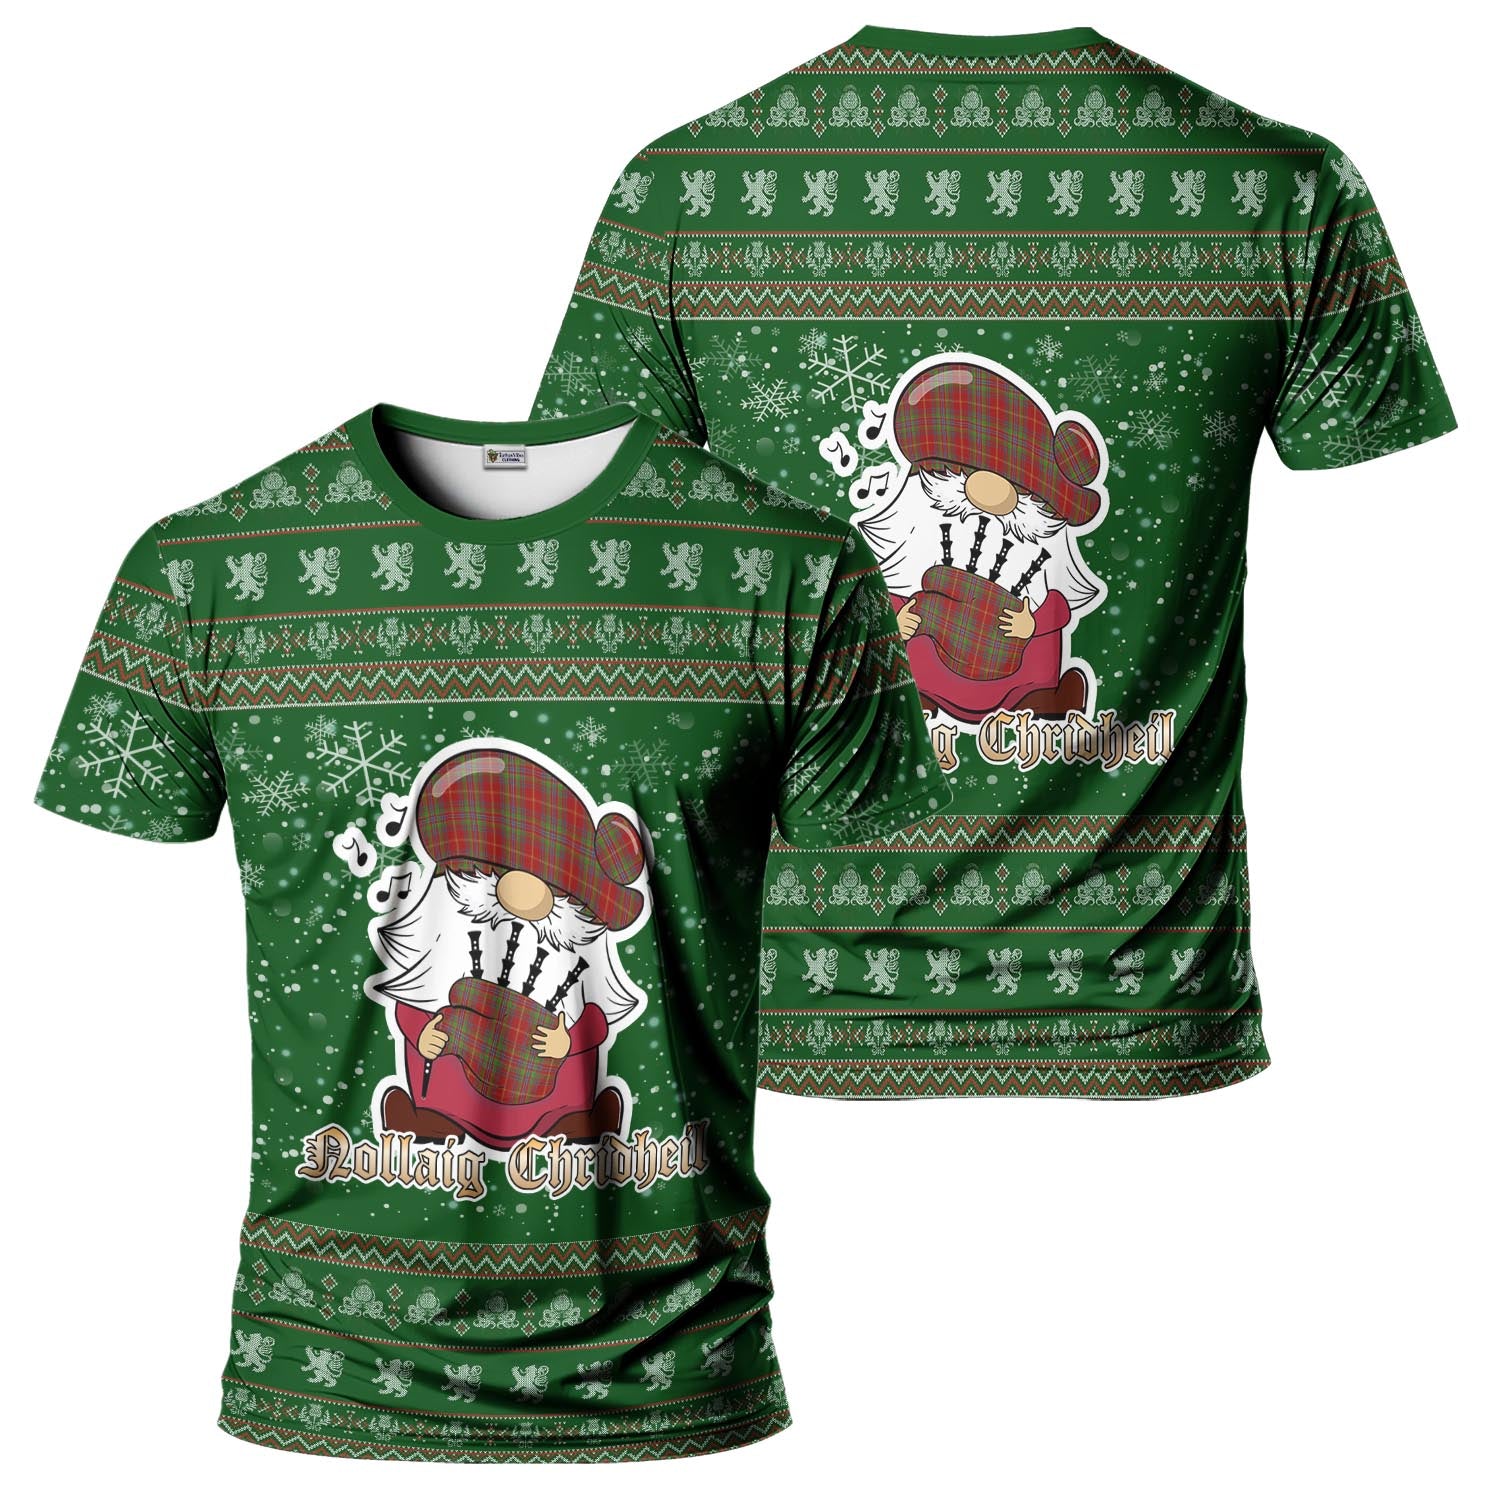 Wren Clan Christmas Family T-Shirt with Funny Gnome Playing Bagpipes Men's Shirt Green - Tartanvibesclothing